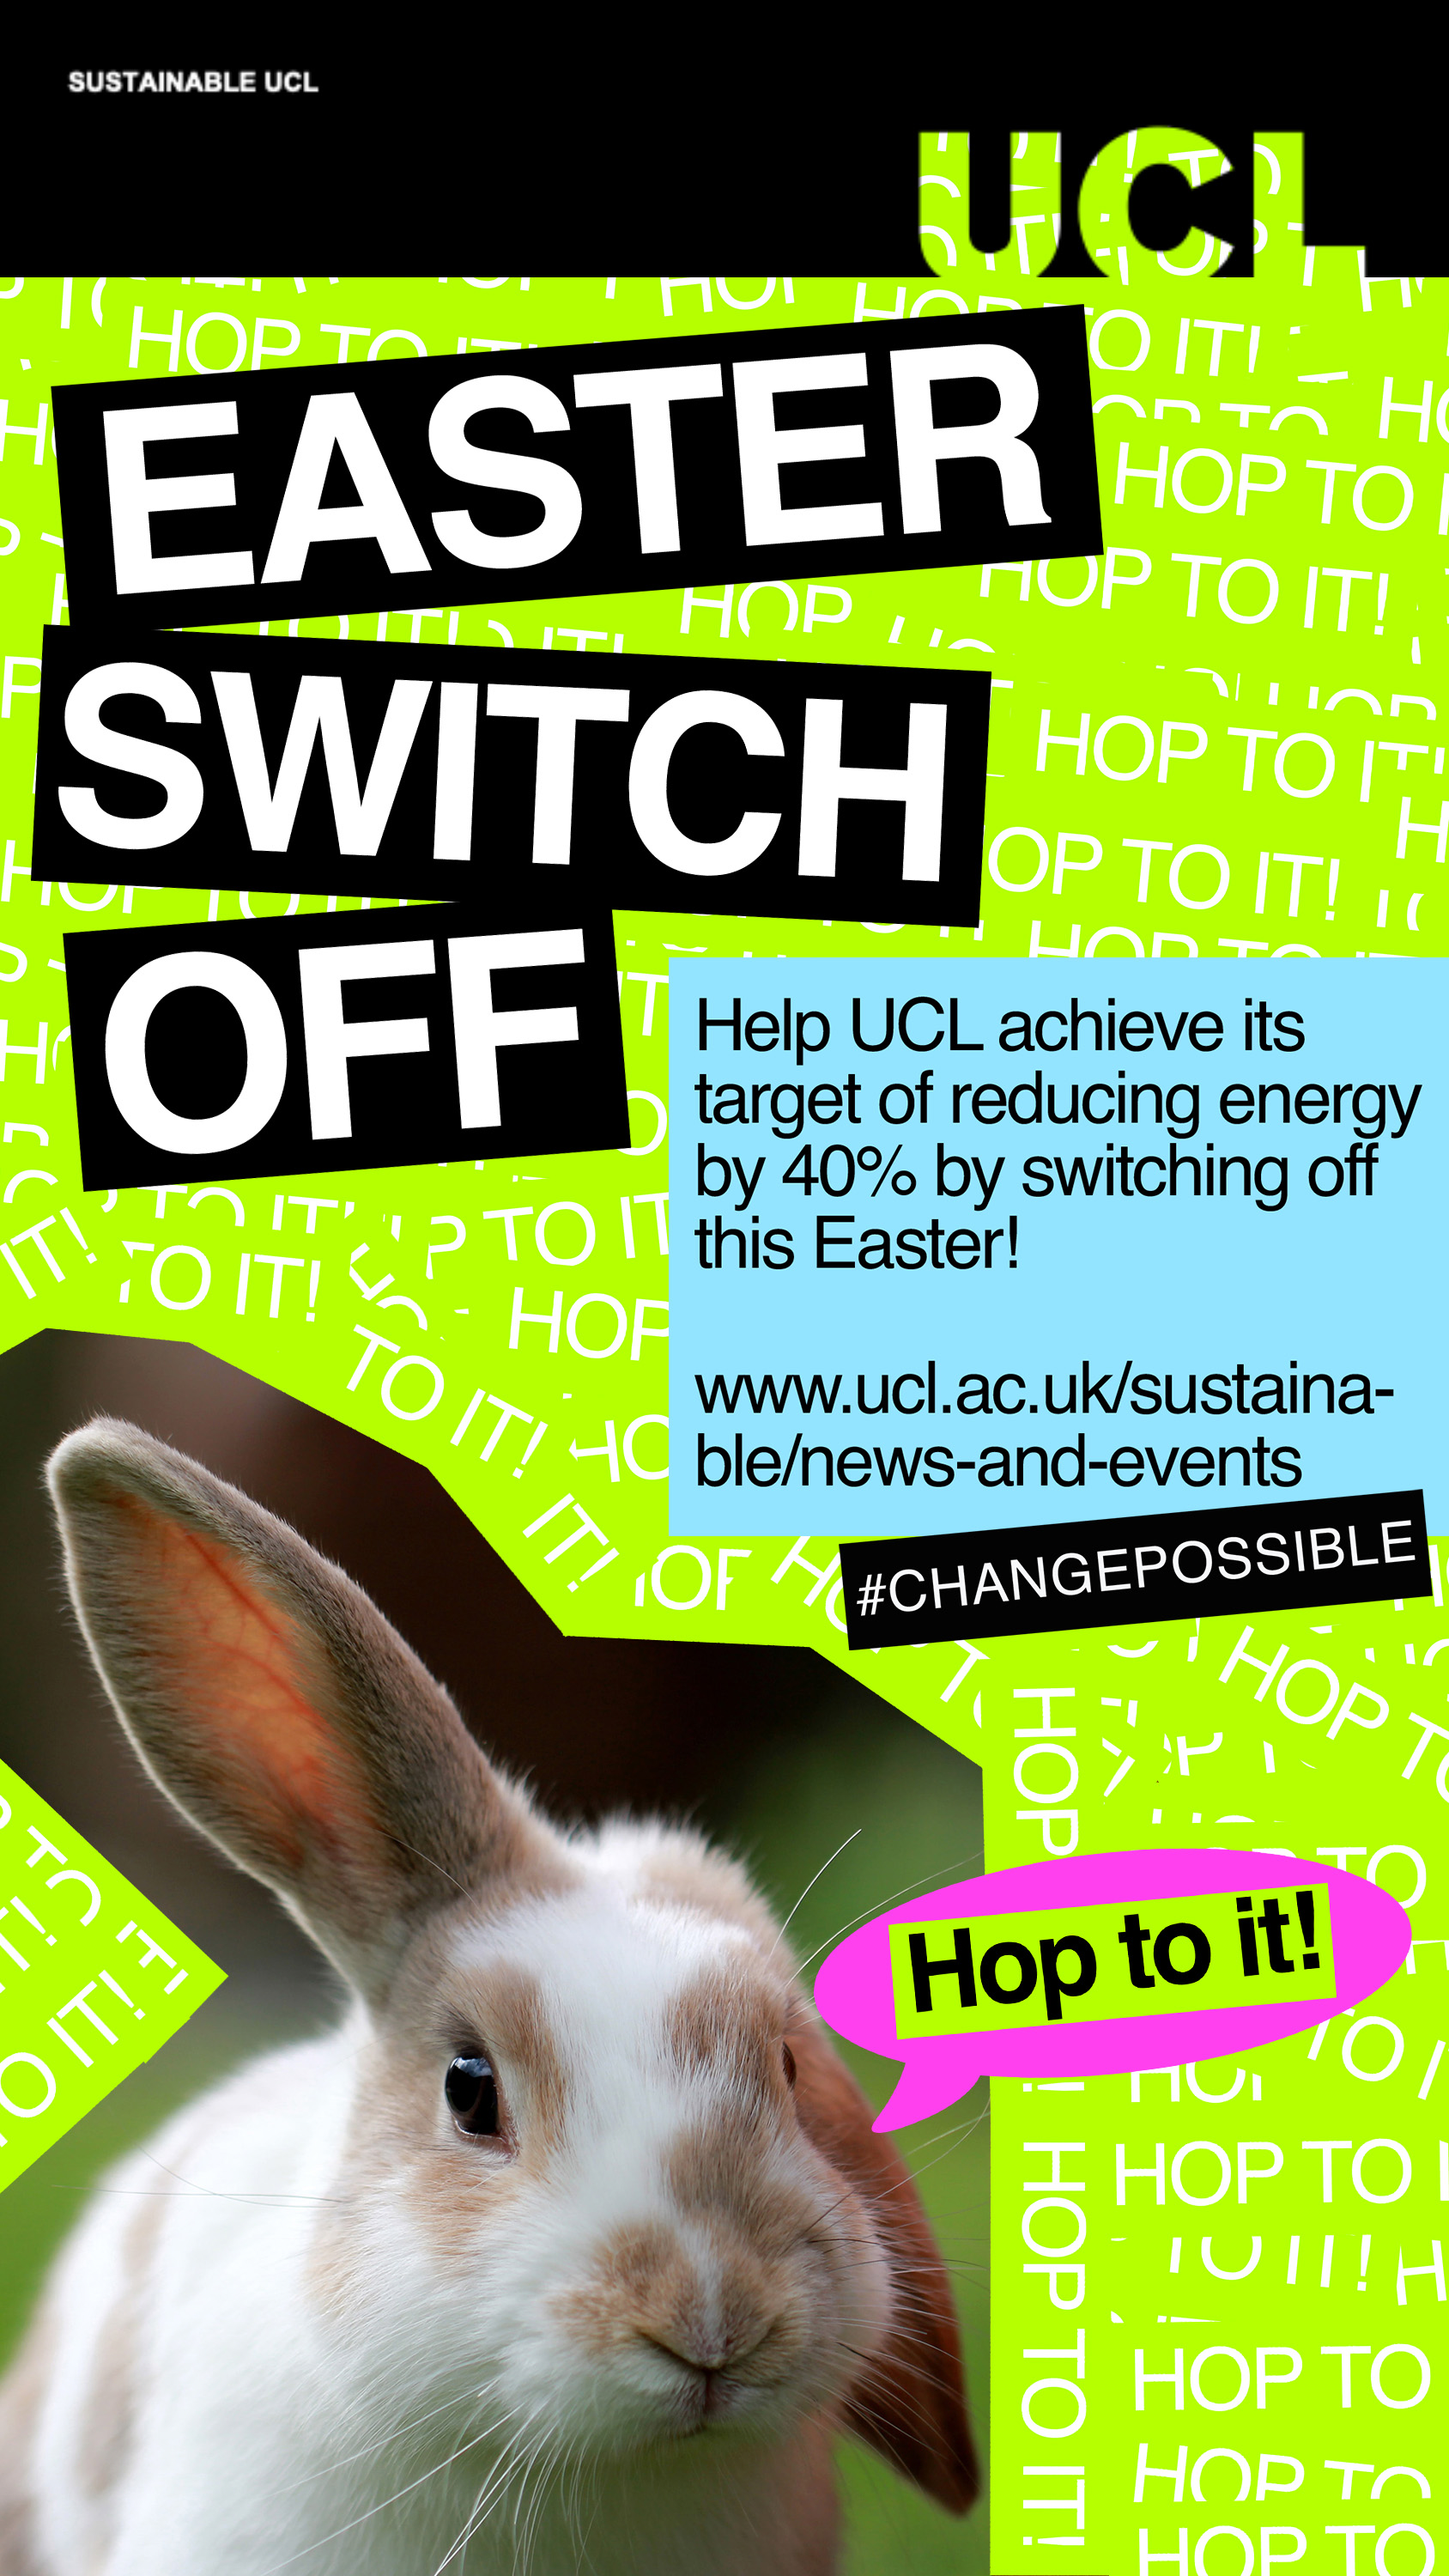 Easter Switch Off portrait screen with rabbit